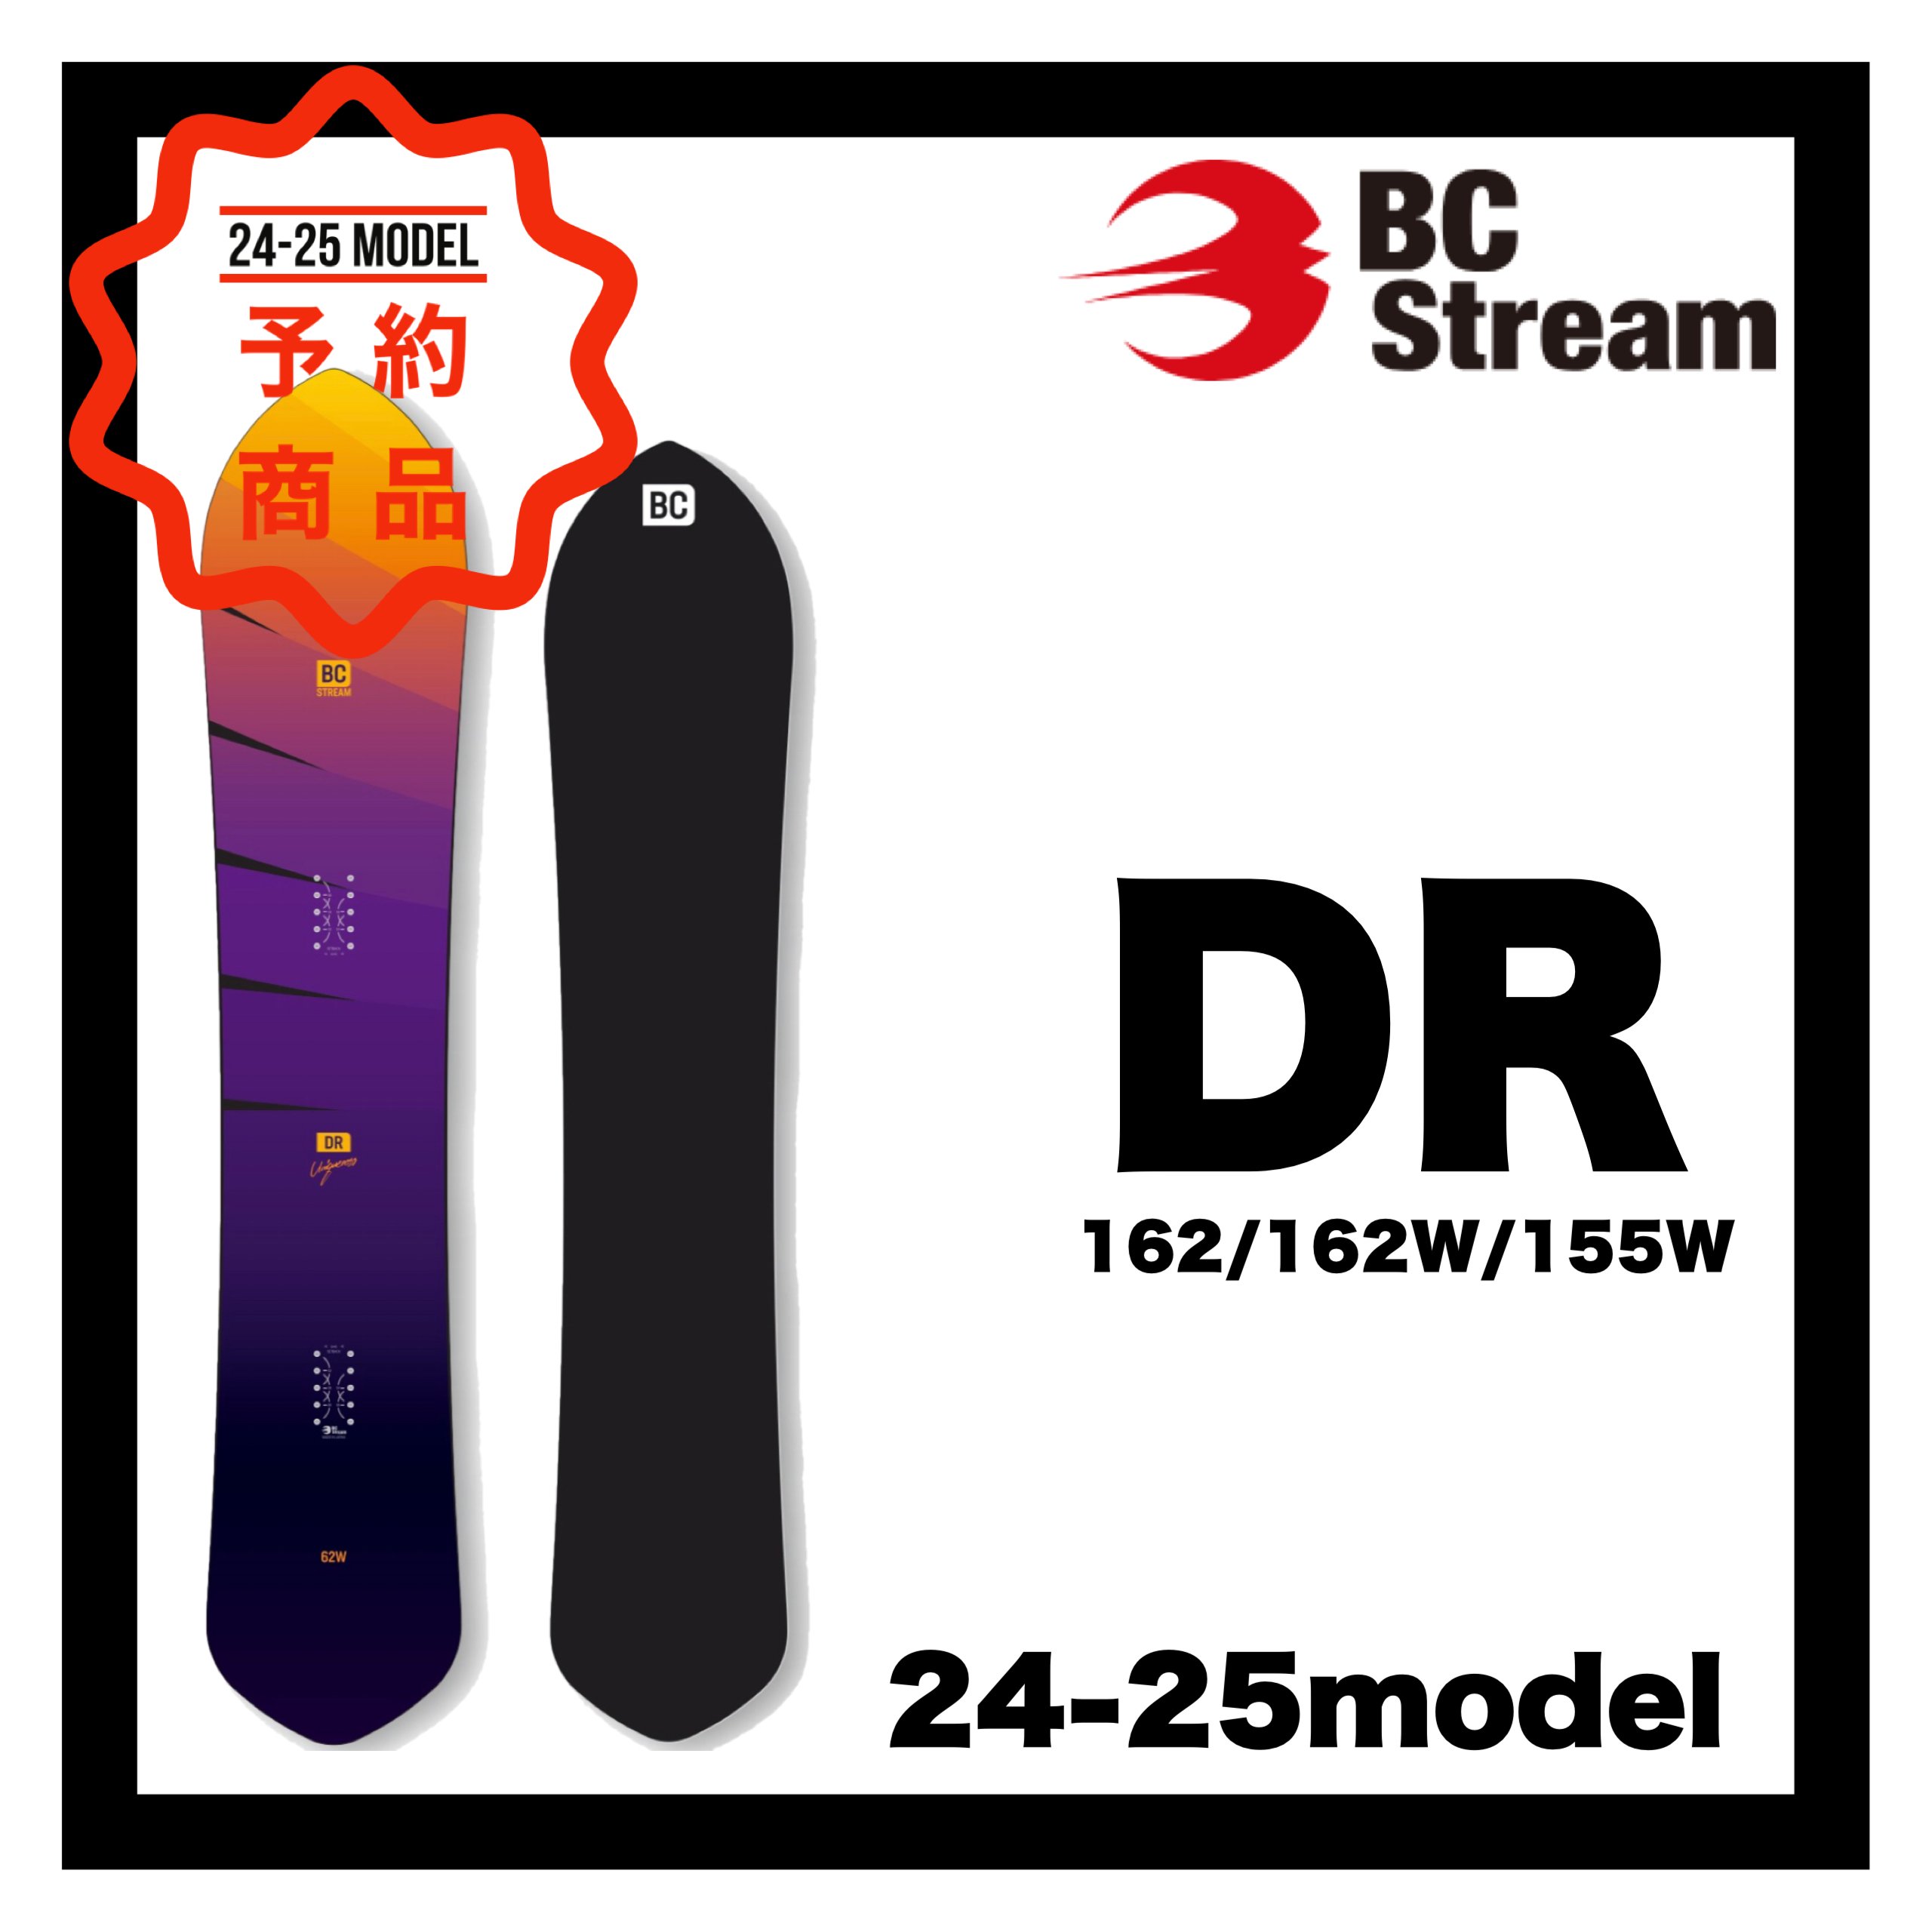 BC-STREAM 【DR 62・55W・62W】 - JOINT HOUSE